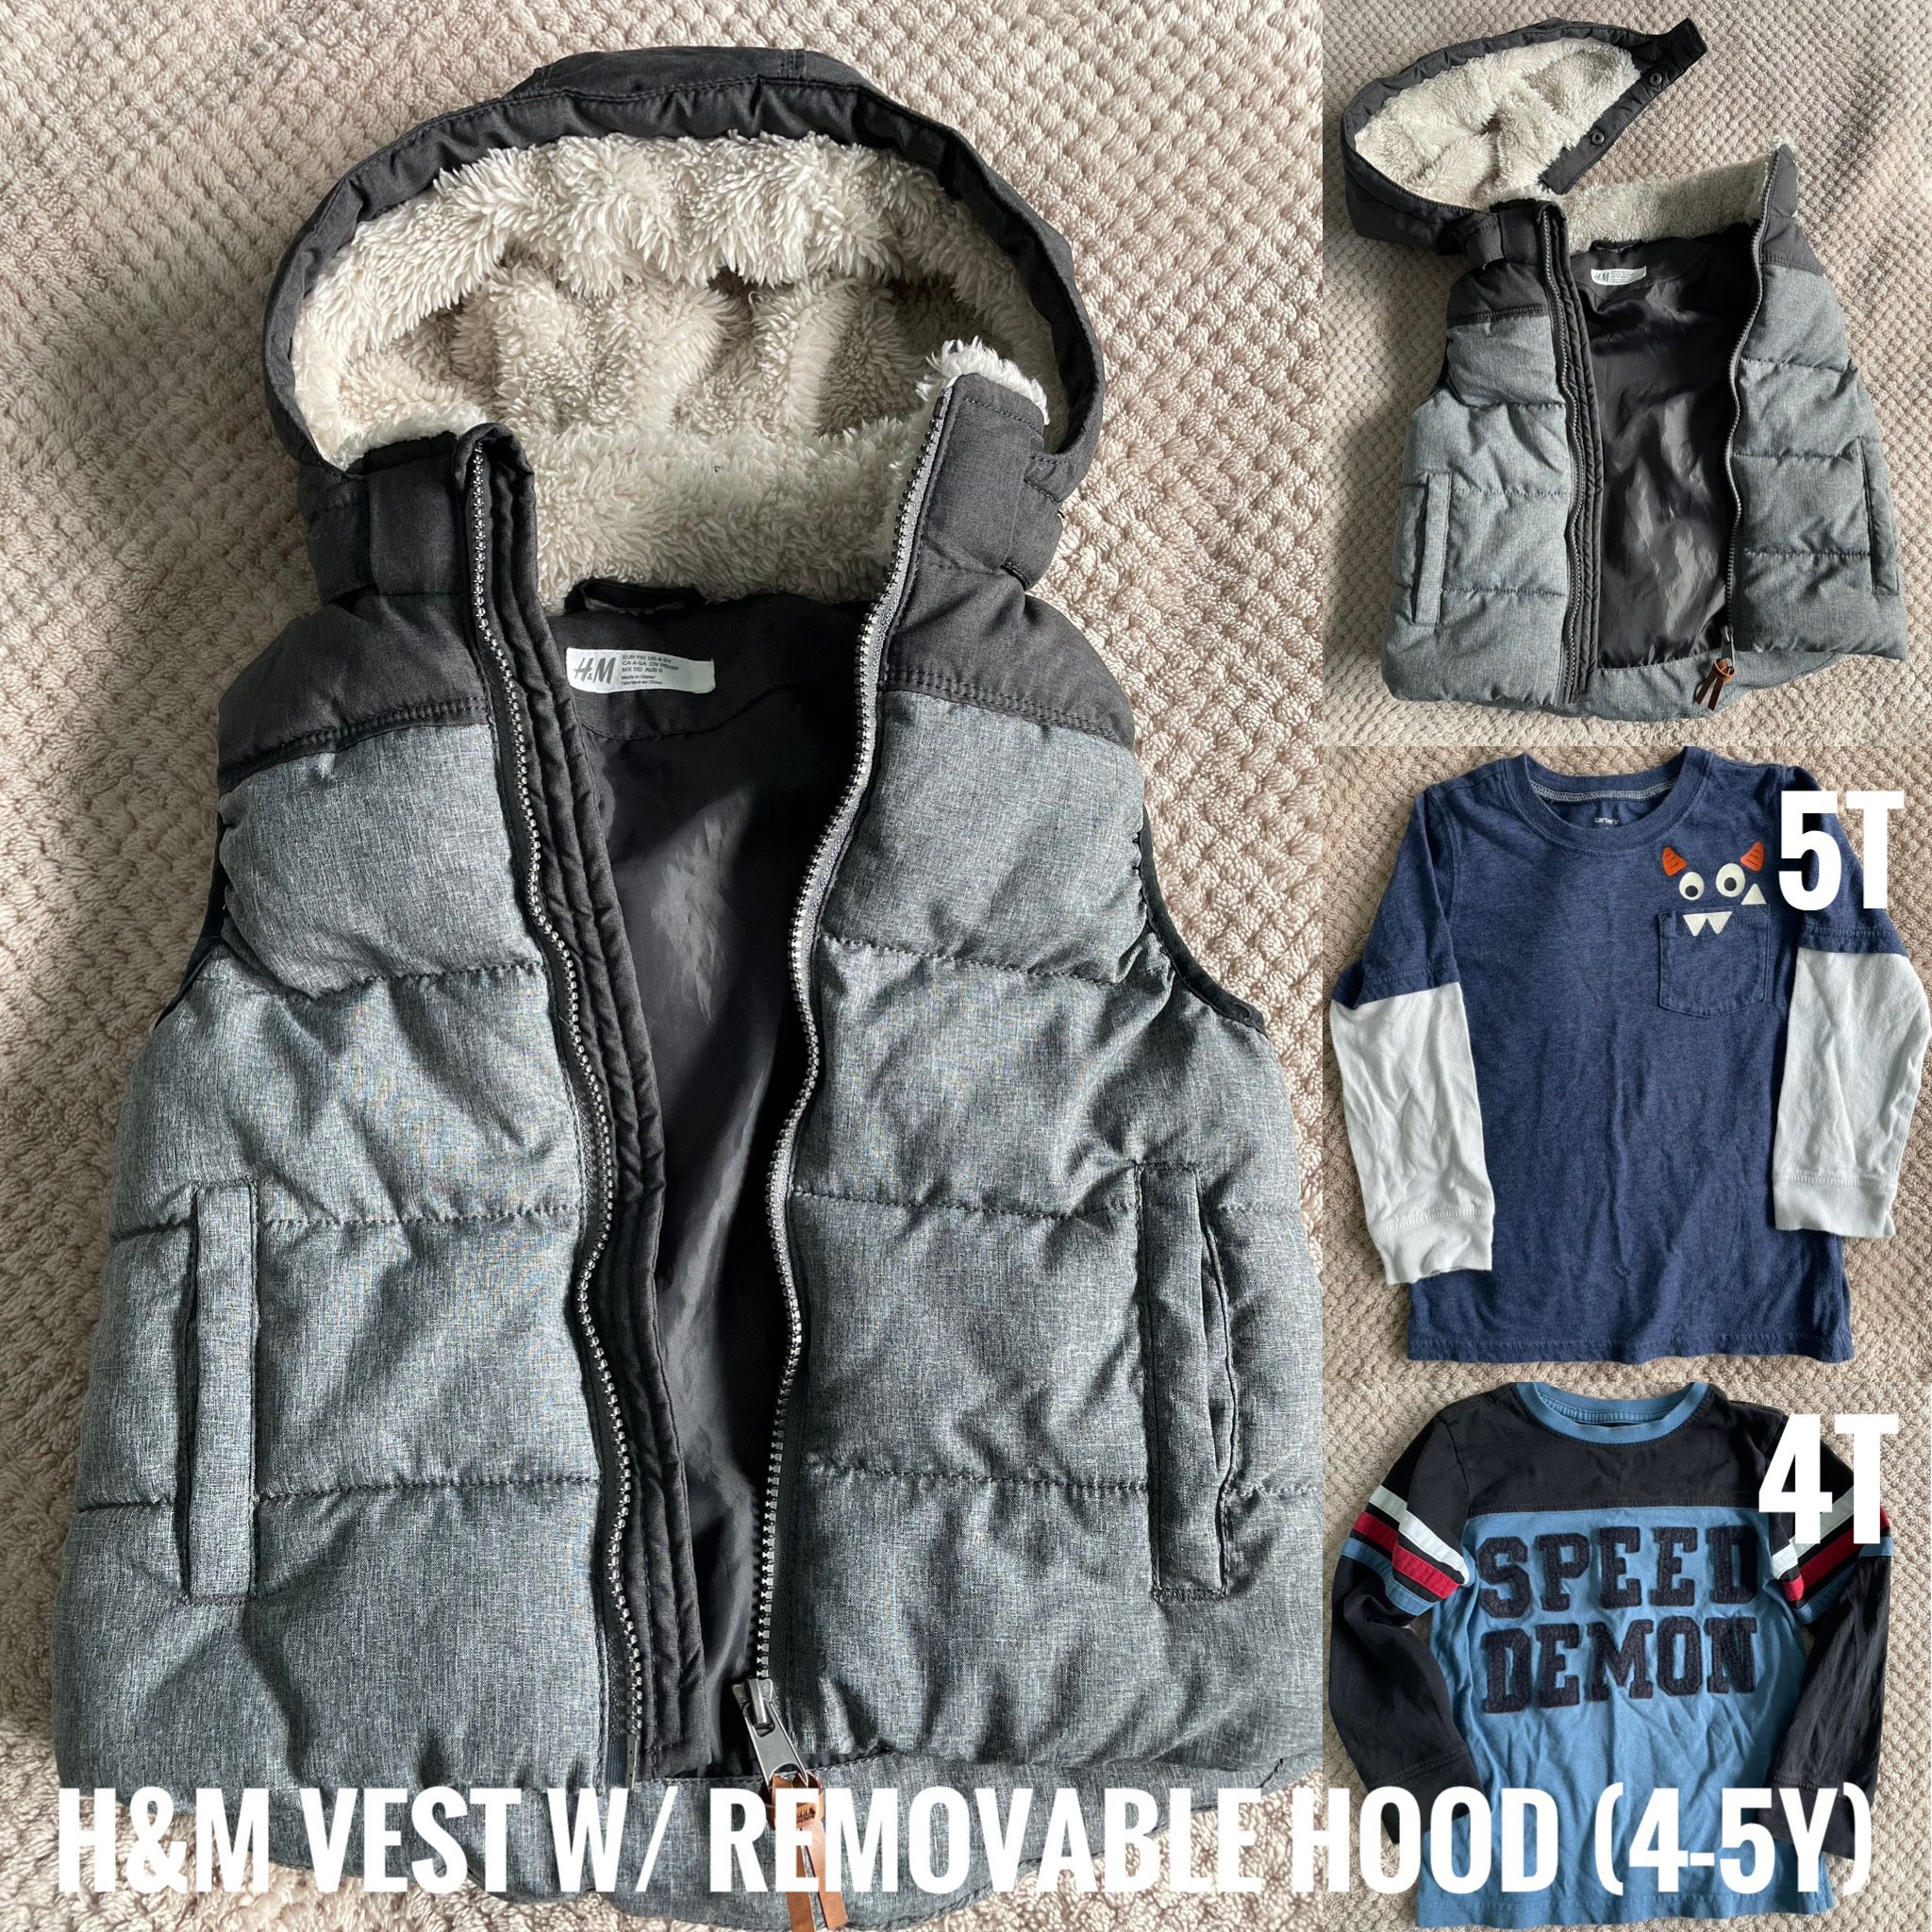 H&M Kids’ Puffer Vest with Sherpa lined Removable Hood(4-5Y) W/ 2 Bonus Long Sleeve Ts